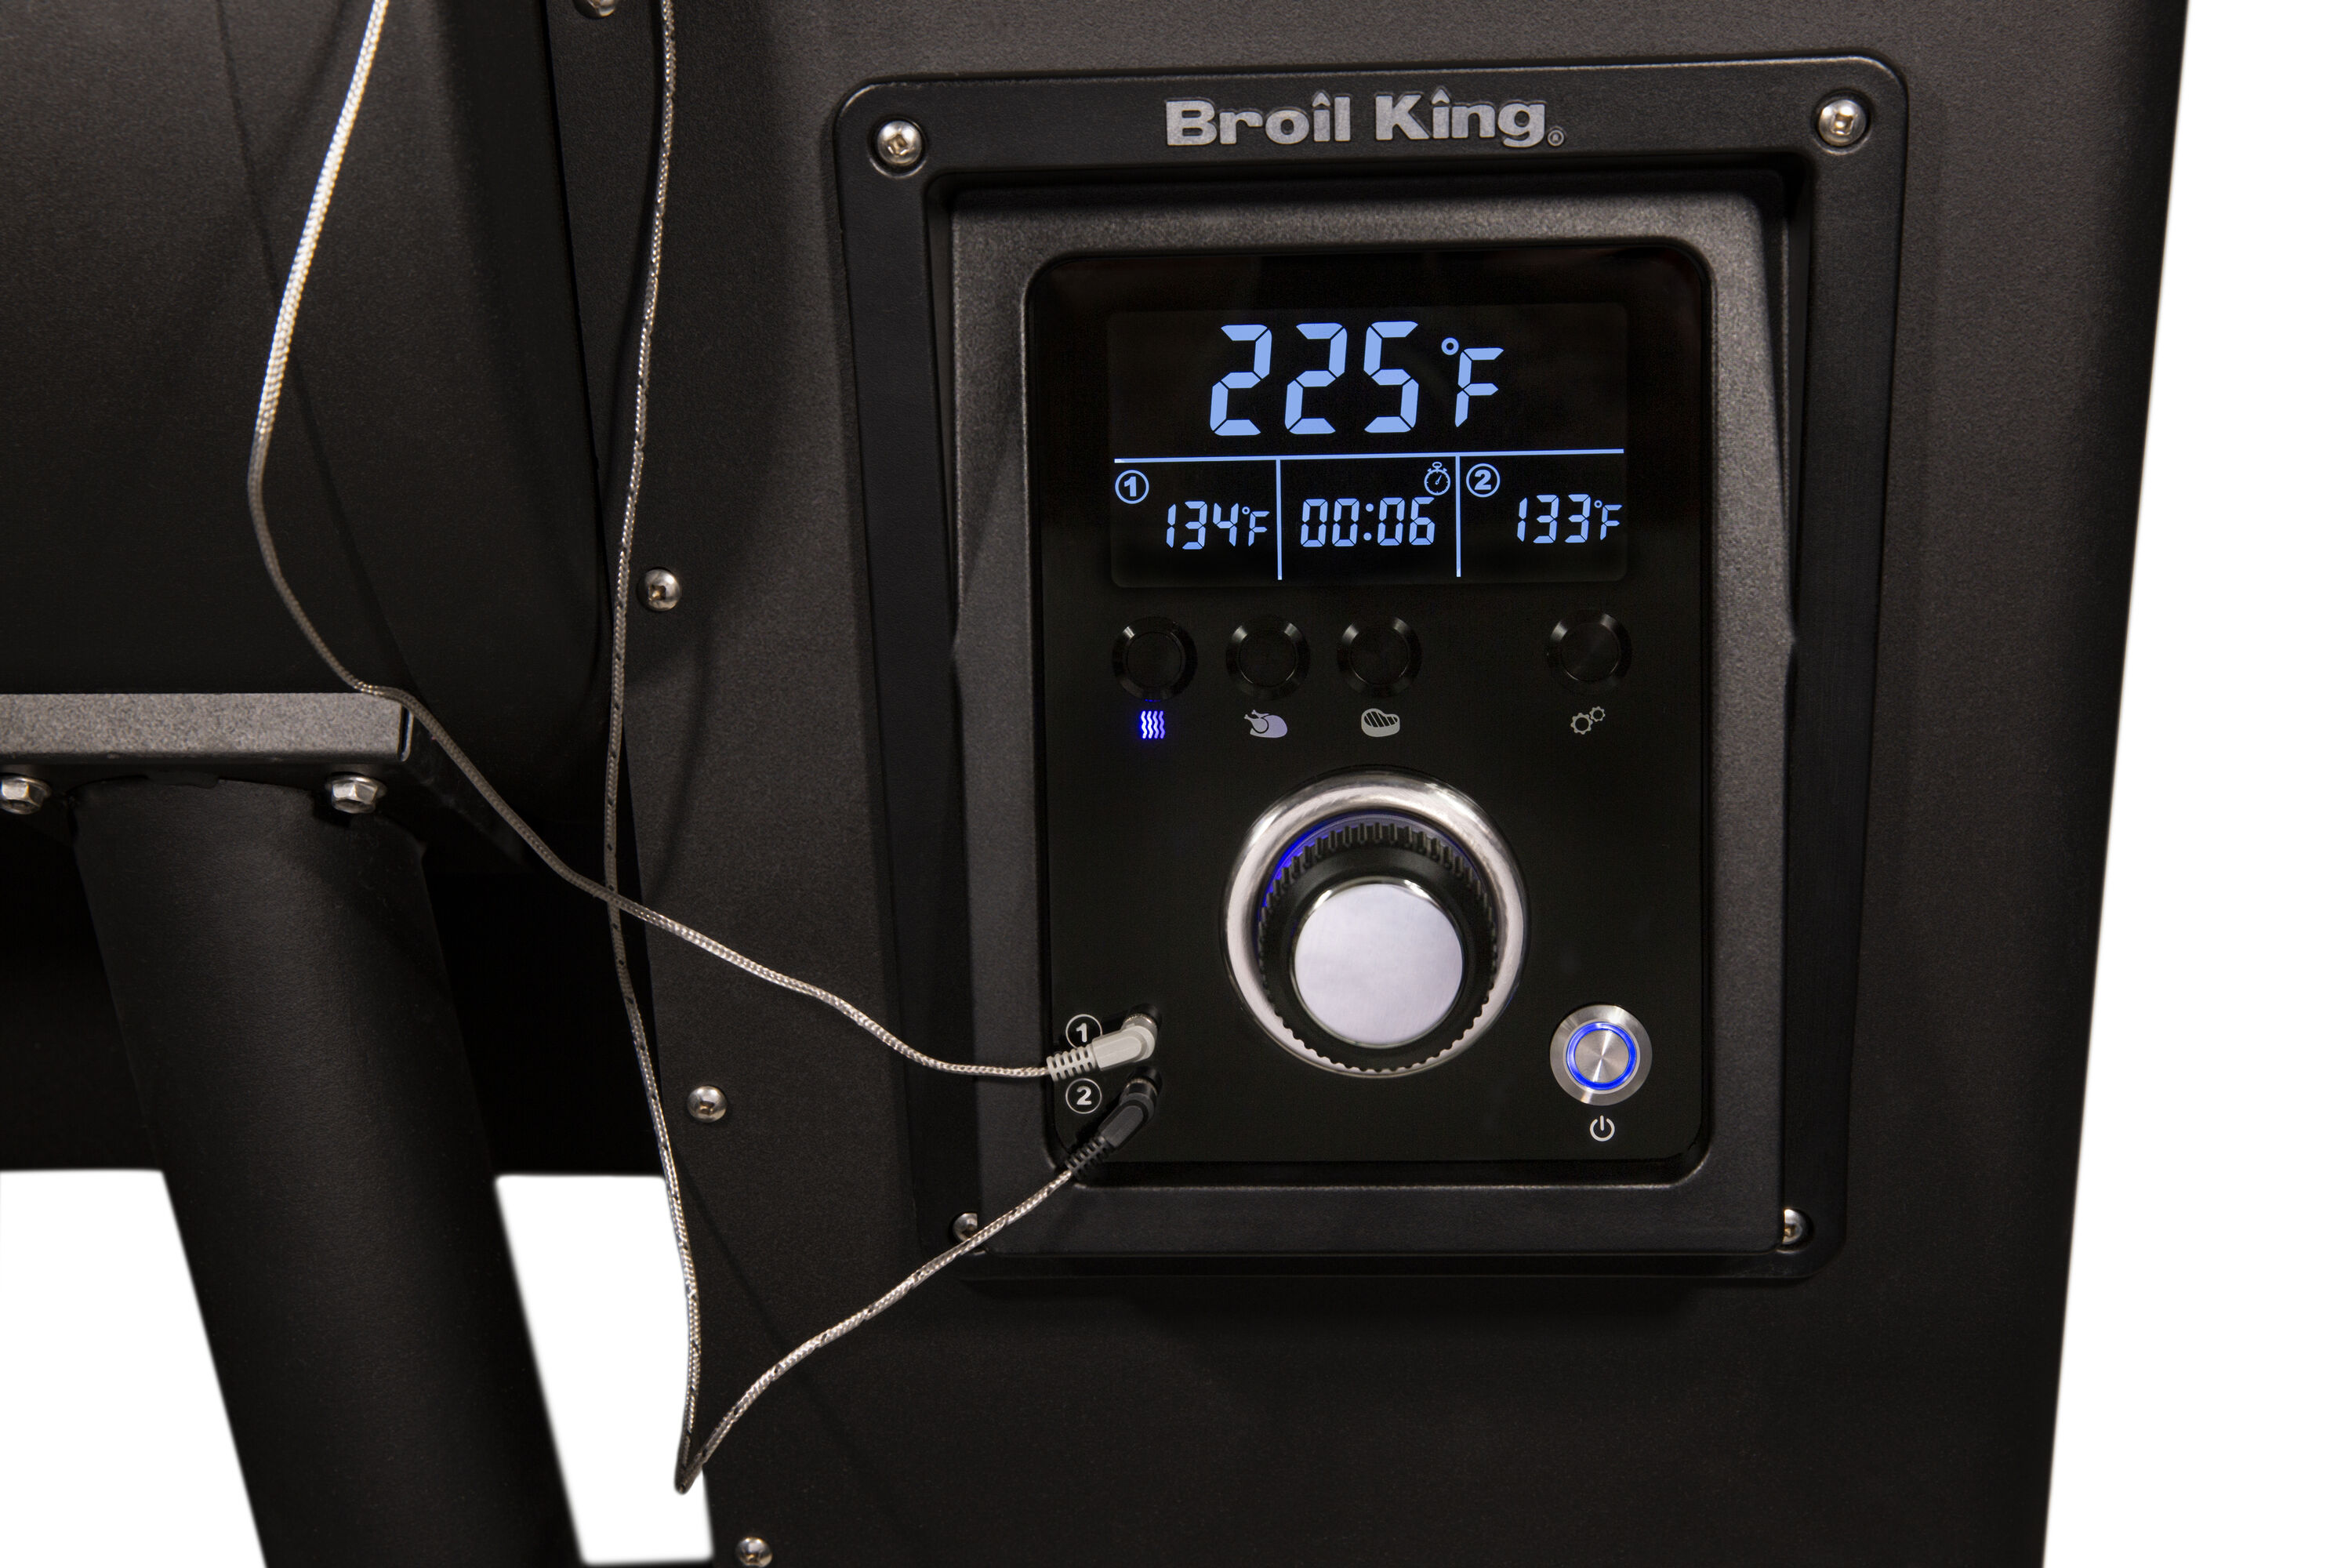 Broil King Meat Thermometers at